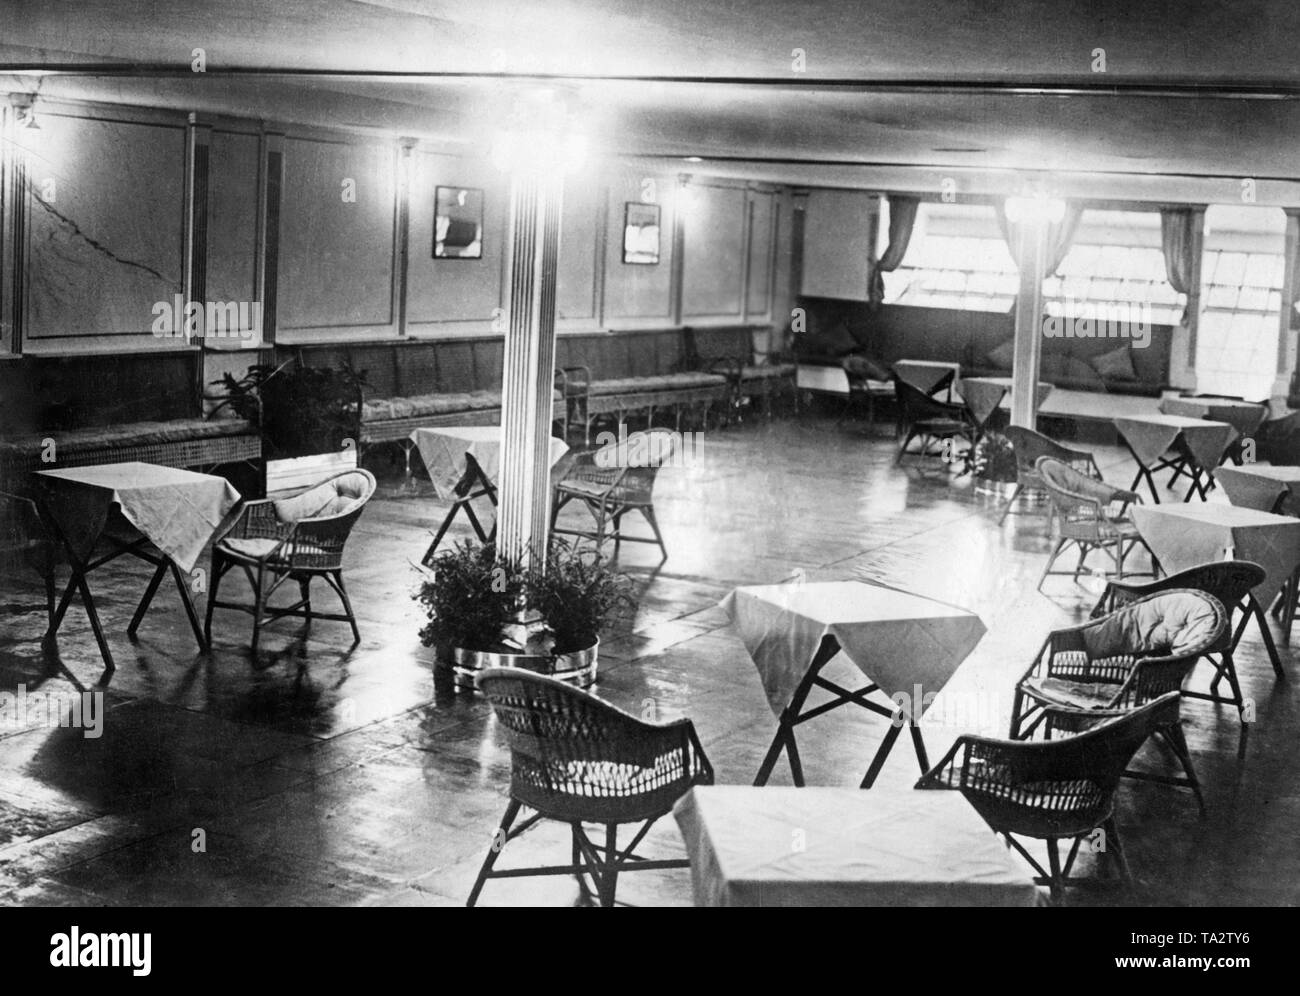 View of the spacious social hall of the English giant airship R 101, where the passengers could sit together at cozy tables. Stock Photo